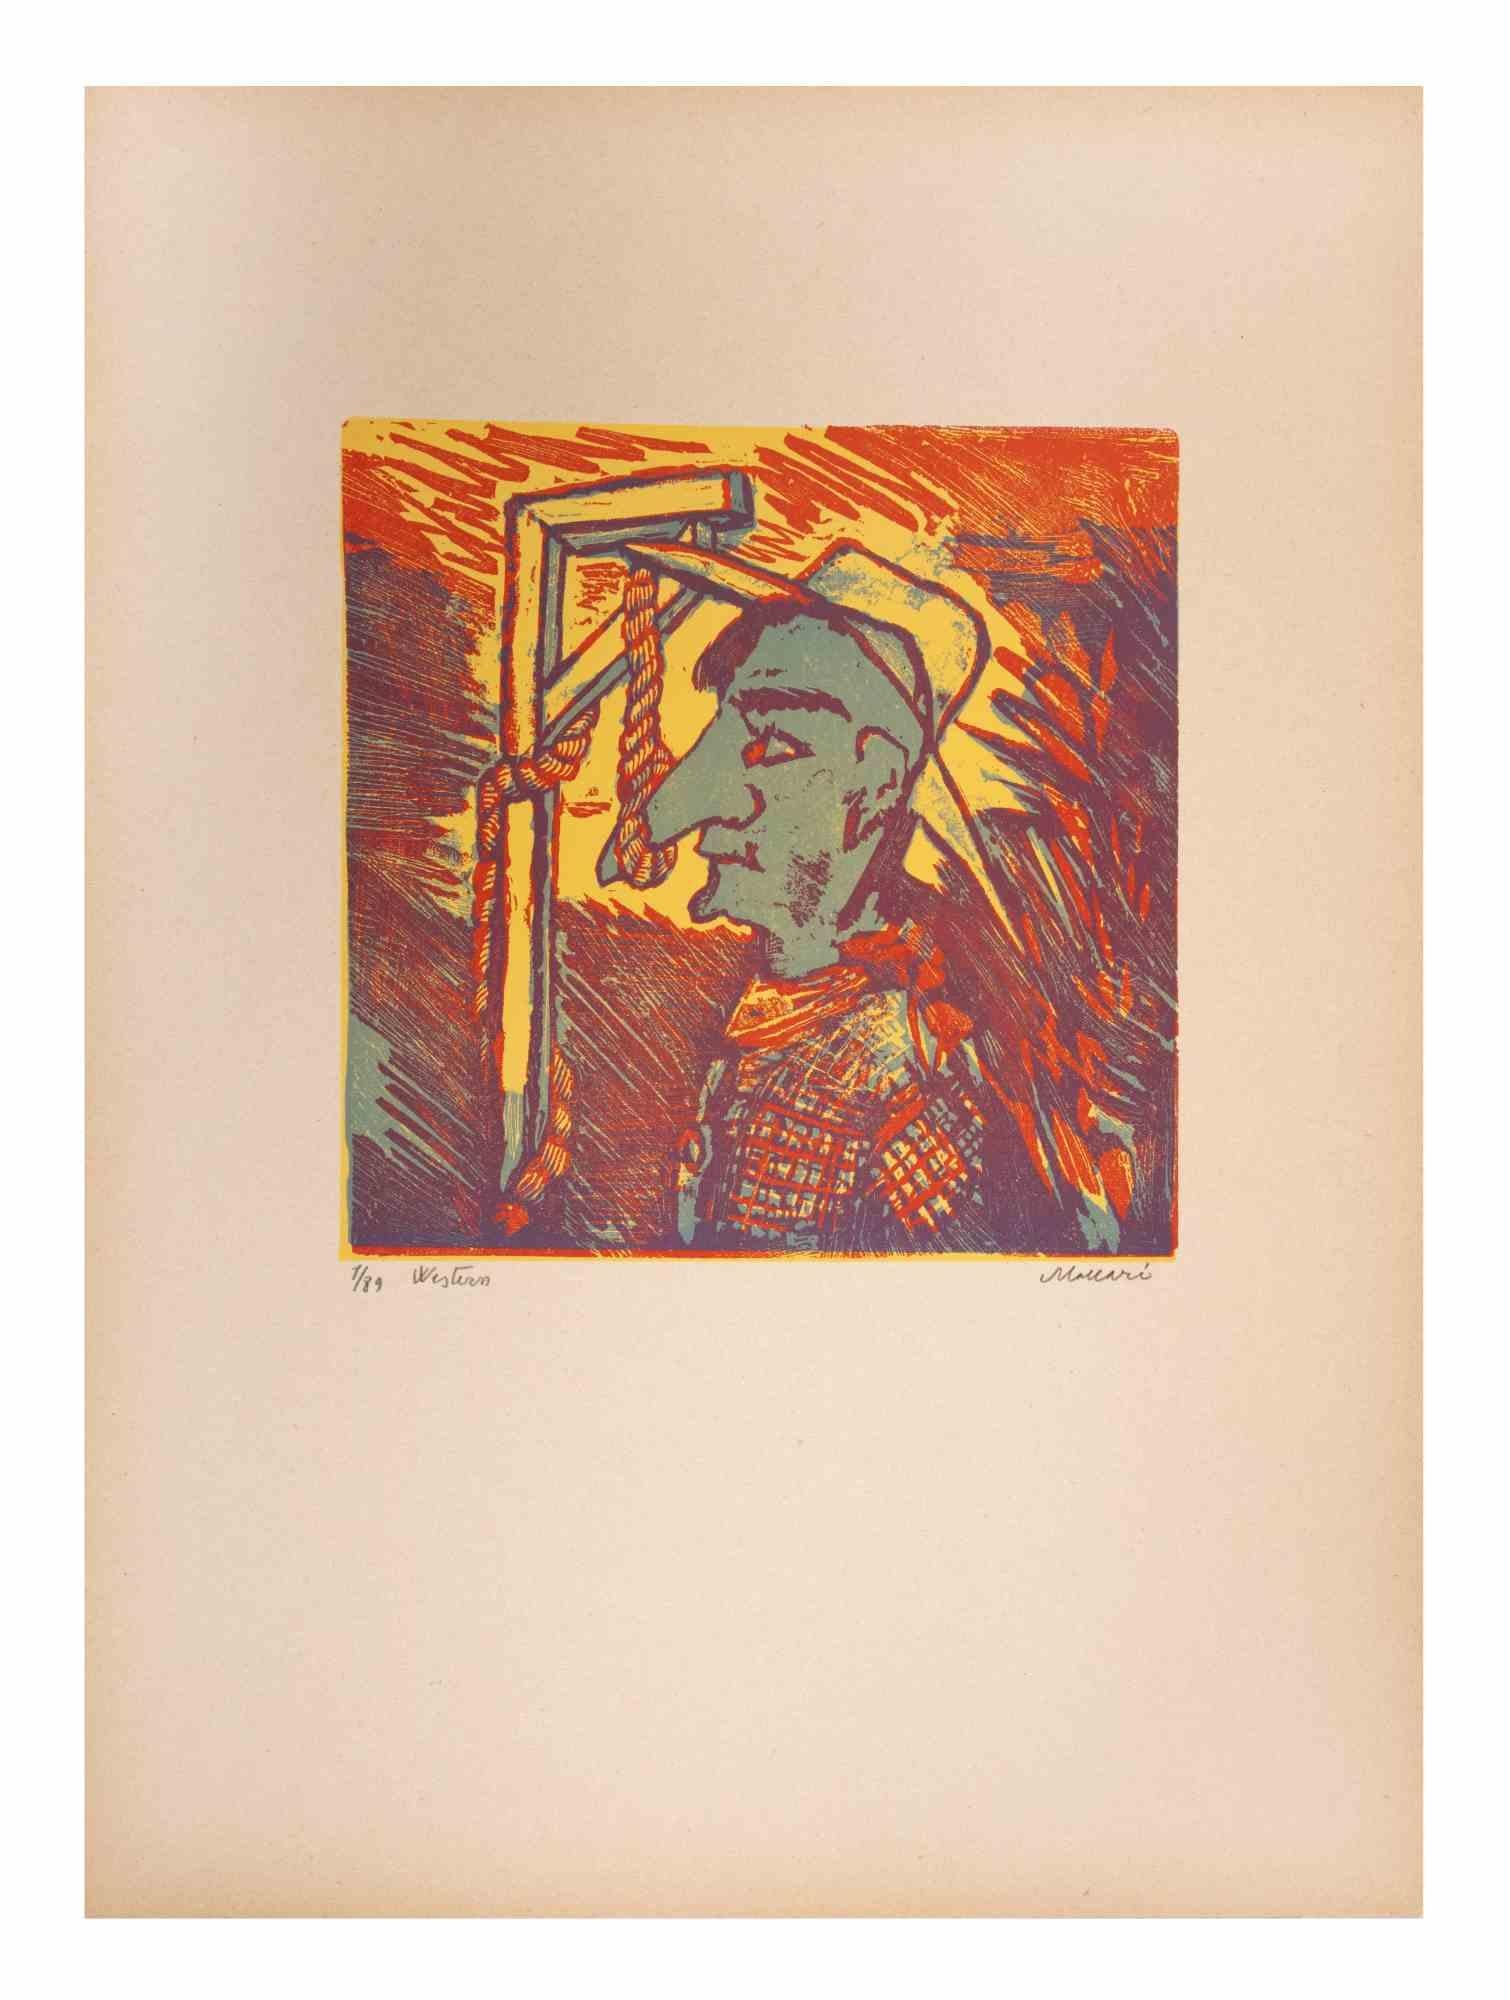 Western is an Artwork realized by Mino Maccari  (1924-1989) in the Mid-20th Century.

Colored woodcut on paper. Hand-signed on the lower, numbered 1/89 specimens and titled on the left margin.

Good conditions.

Mino Maccari (Siena, 1924-Rome, June